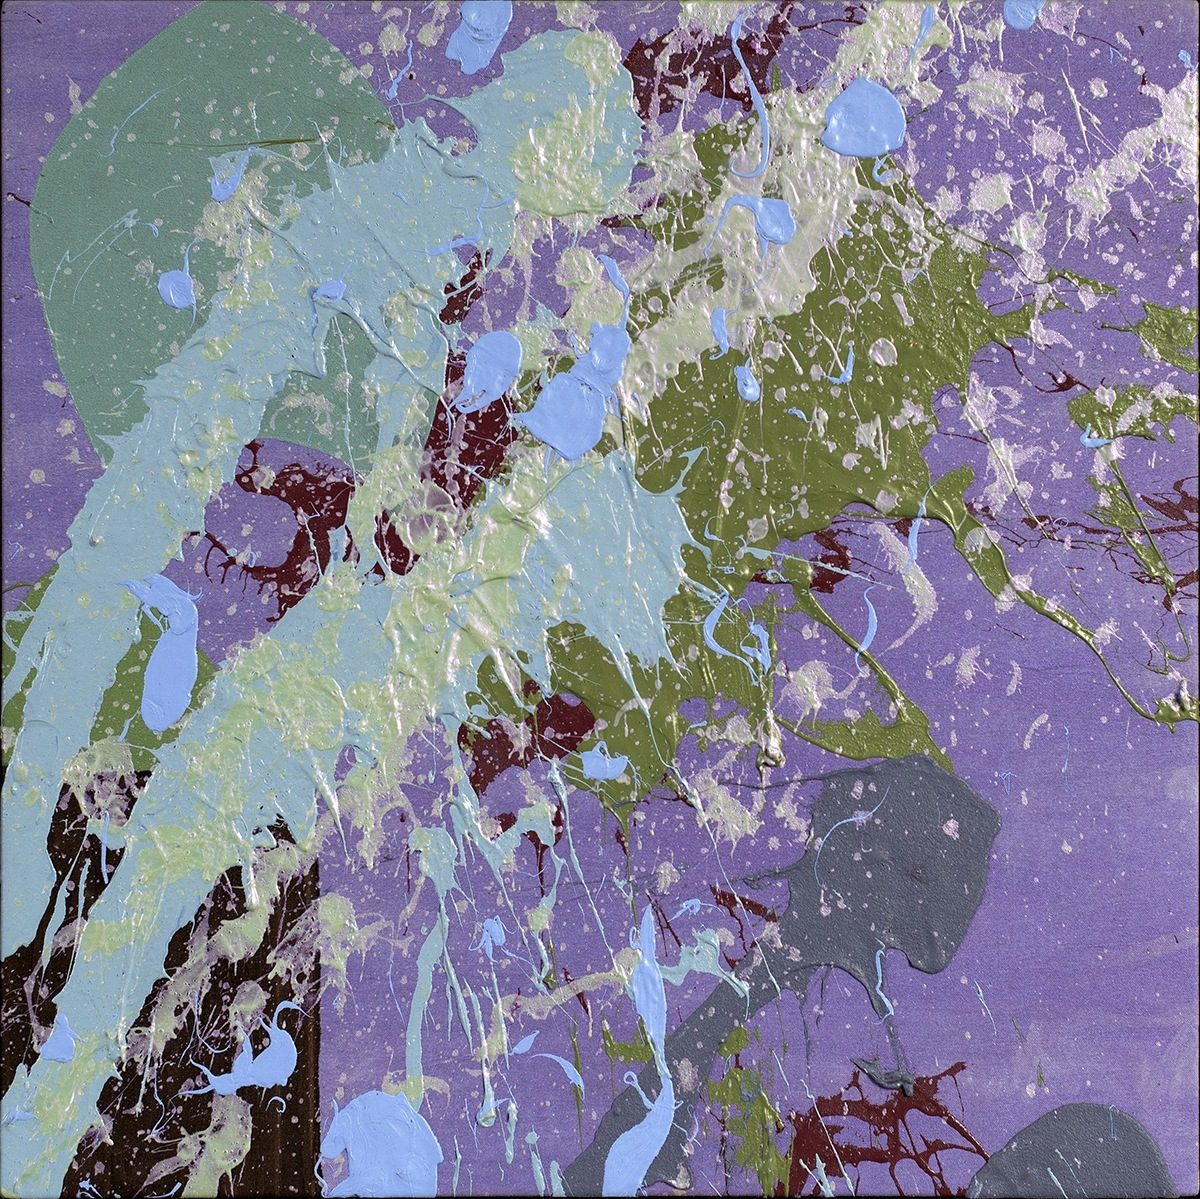 Abstract painting by artist Misty Hockenbury titled "My Color Wedding" with splatter design in shades of purple, green, and blue.